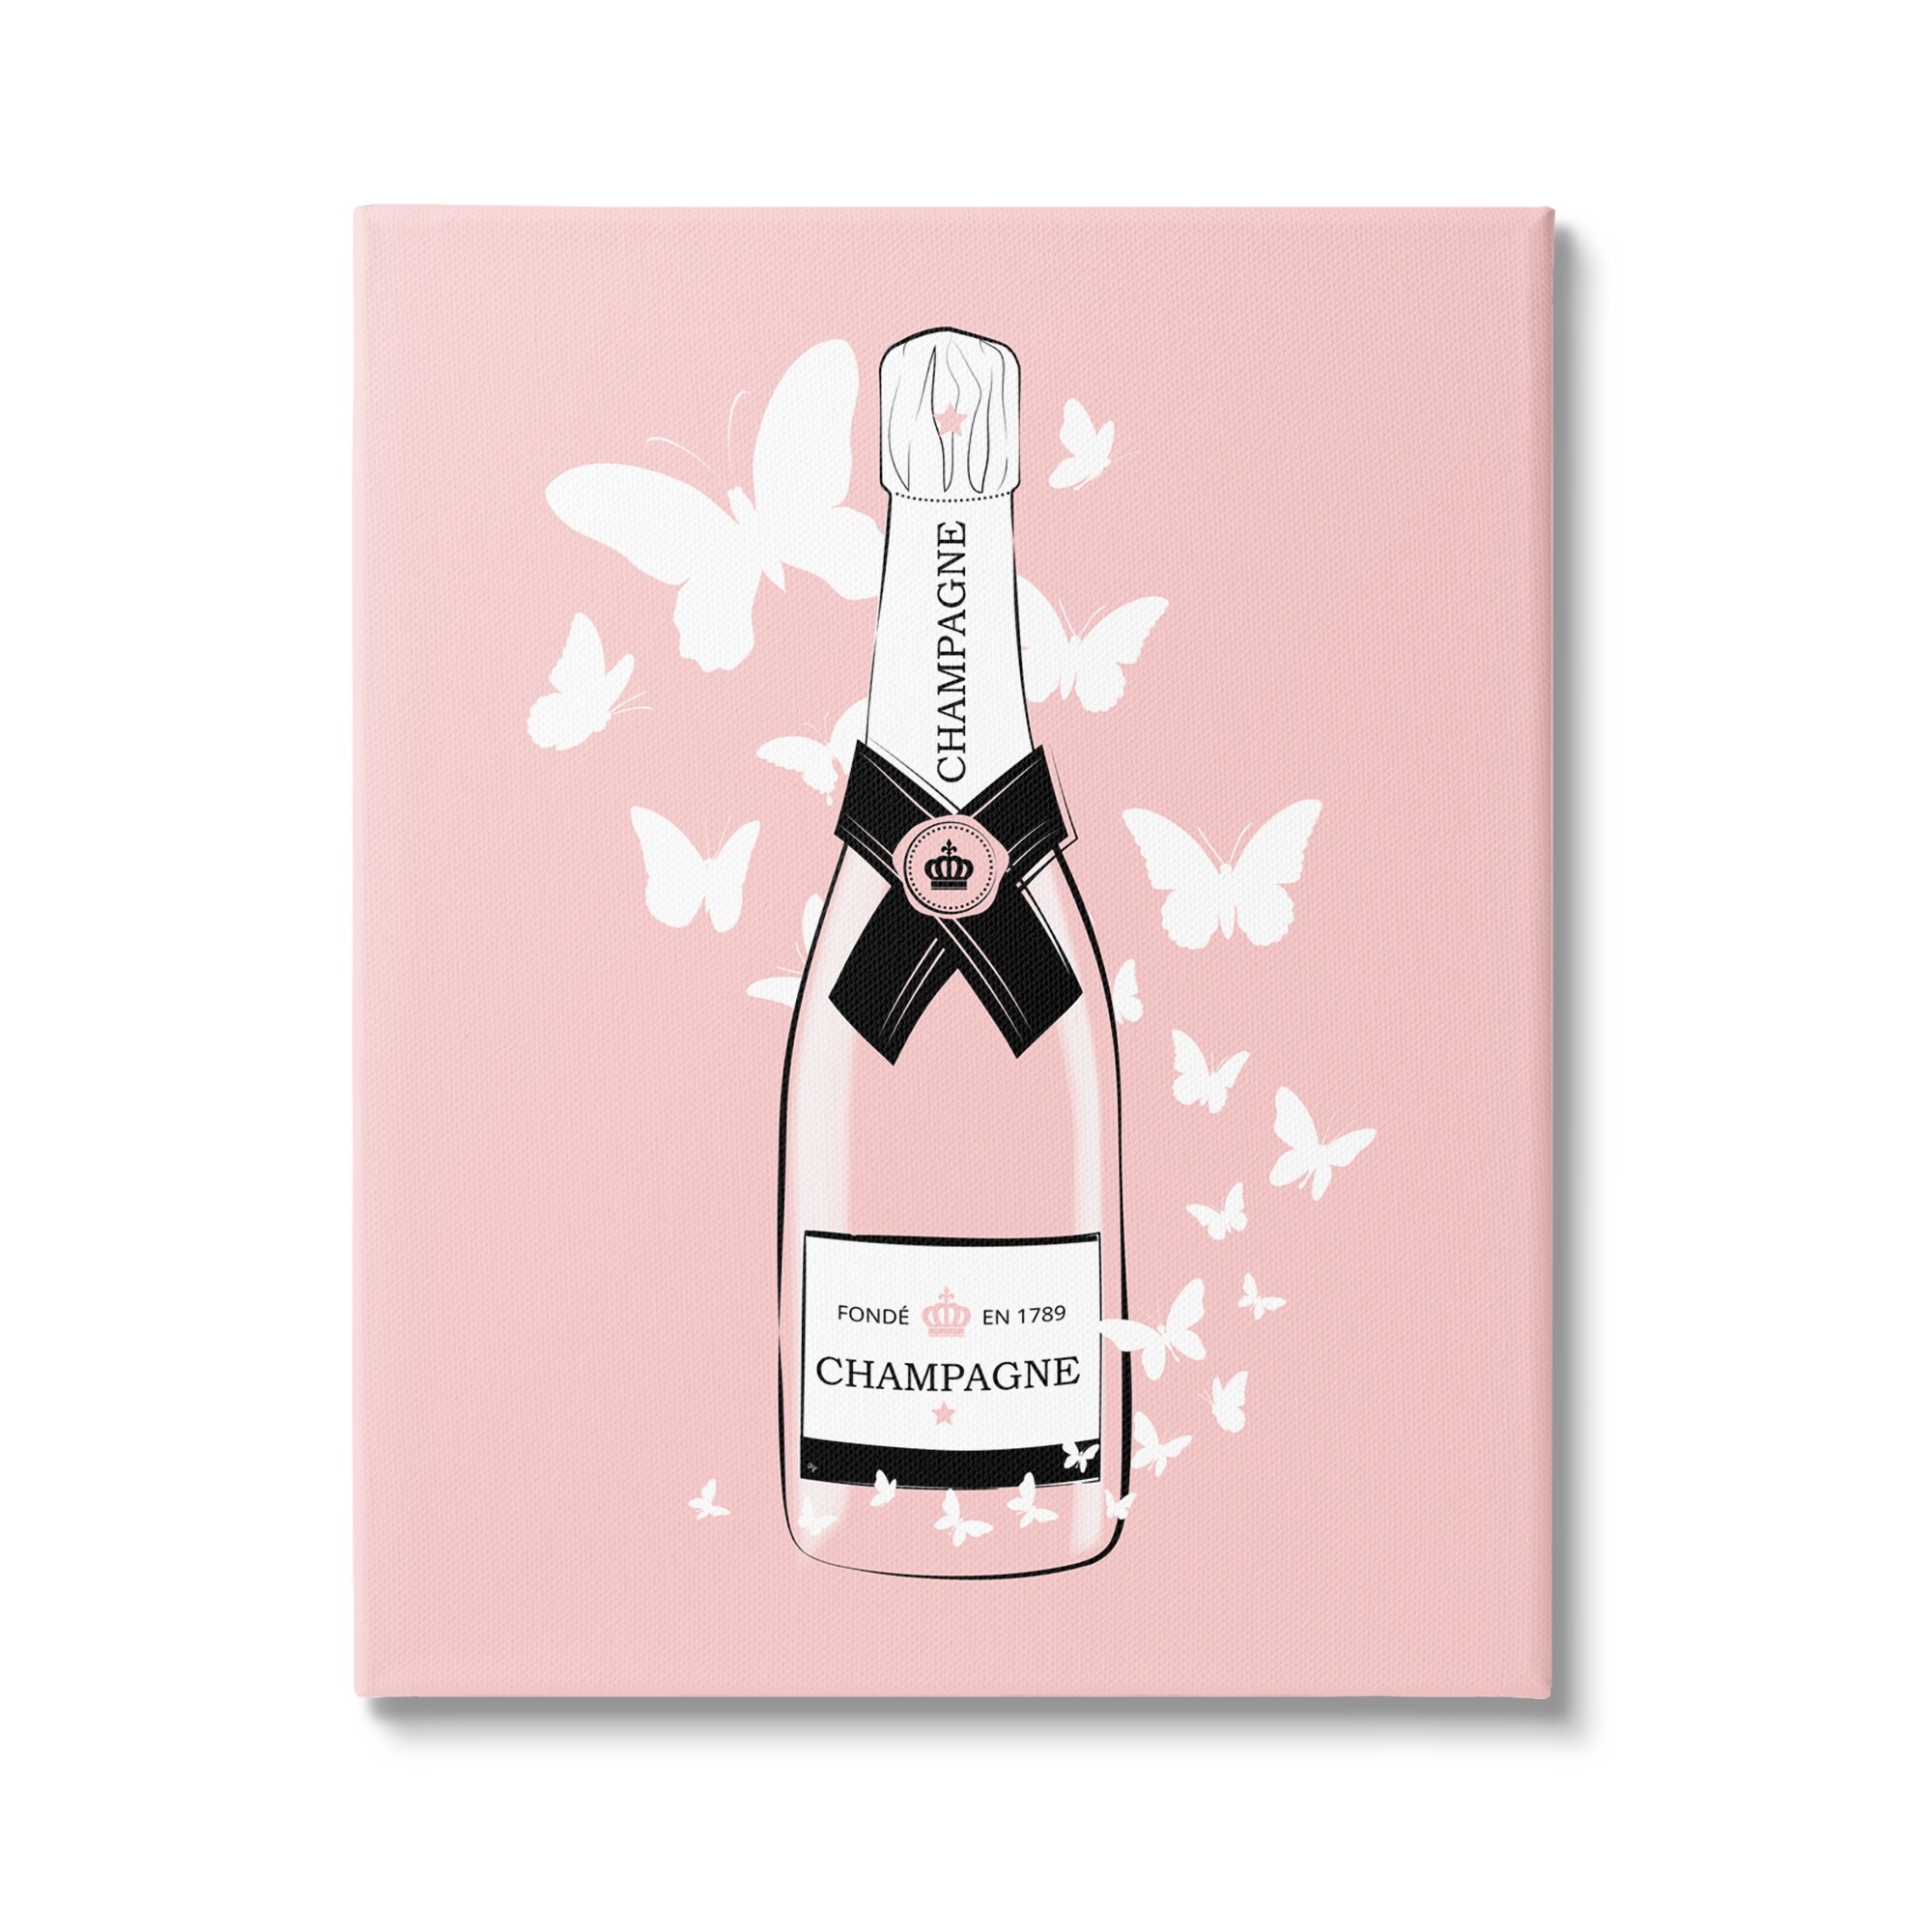 The Stupell Home Decor Collection Glam Fashion Champagne Bottles